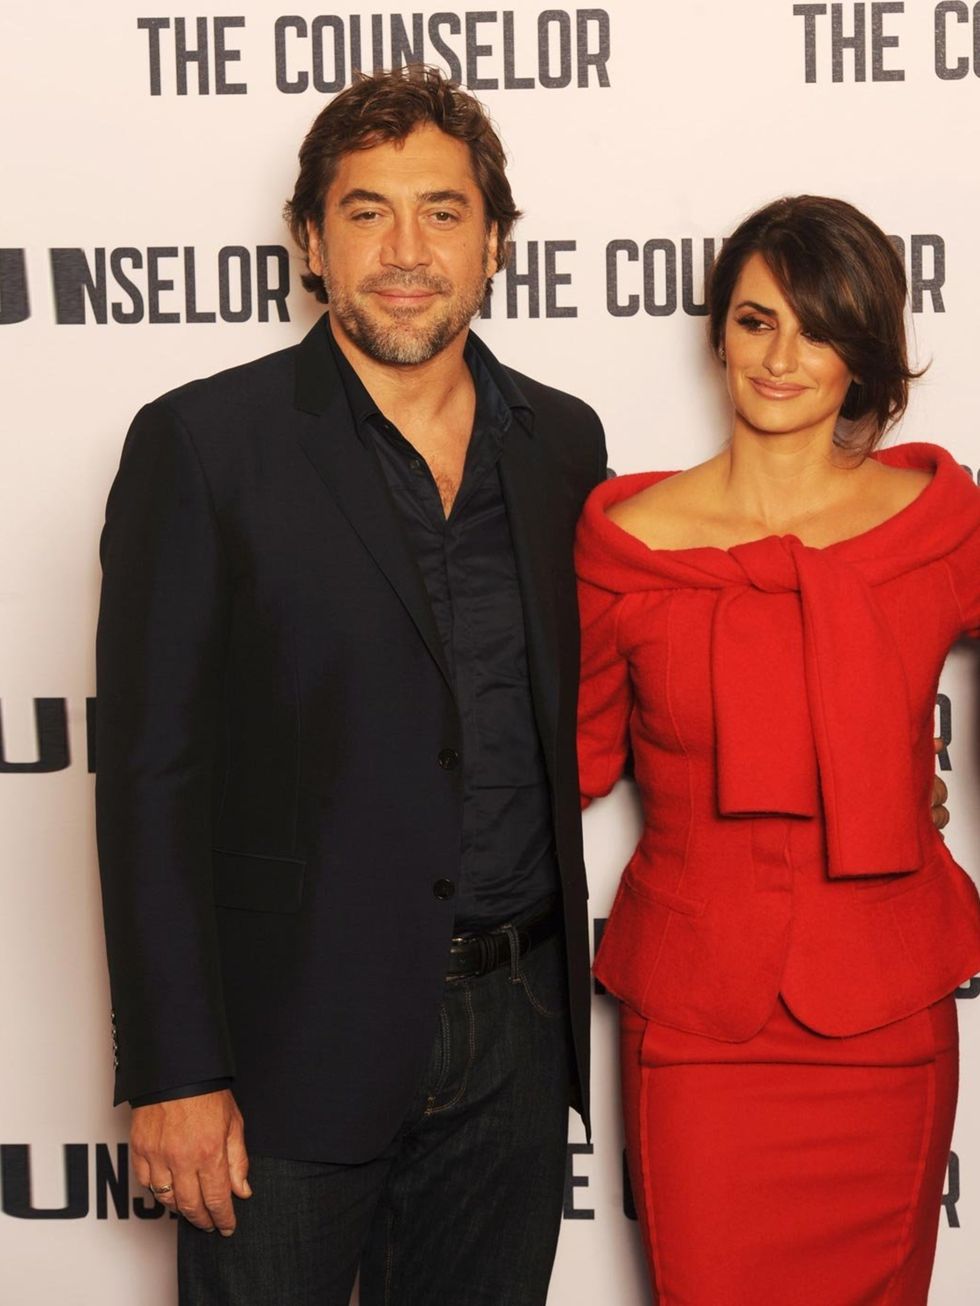 <p>Luna Bardem, a second child for hot Hollywood couple Javier and Pen, was born on 22 July - making her a date twin with a certain little prince.</p><p><a href="http://www.elleuk.com/star-style/celebrity-fashion-trends/pop-culture-moments-2013-miley-cyru